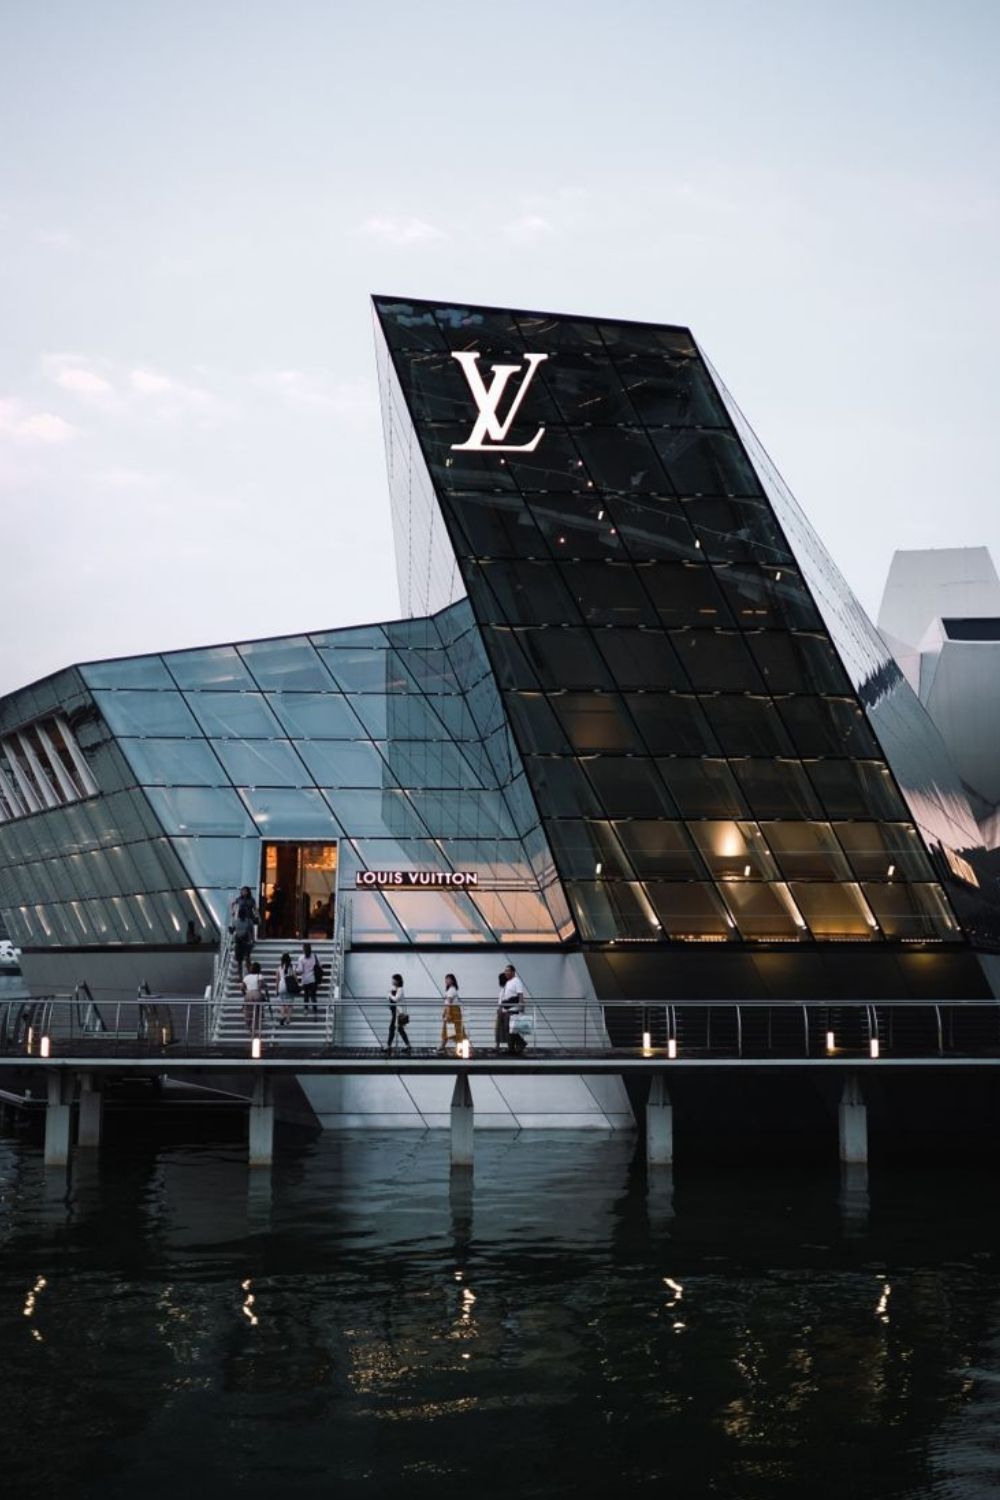 A building with the lv logo on it - Louis Vuitton